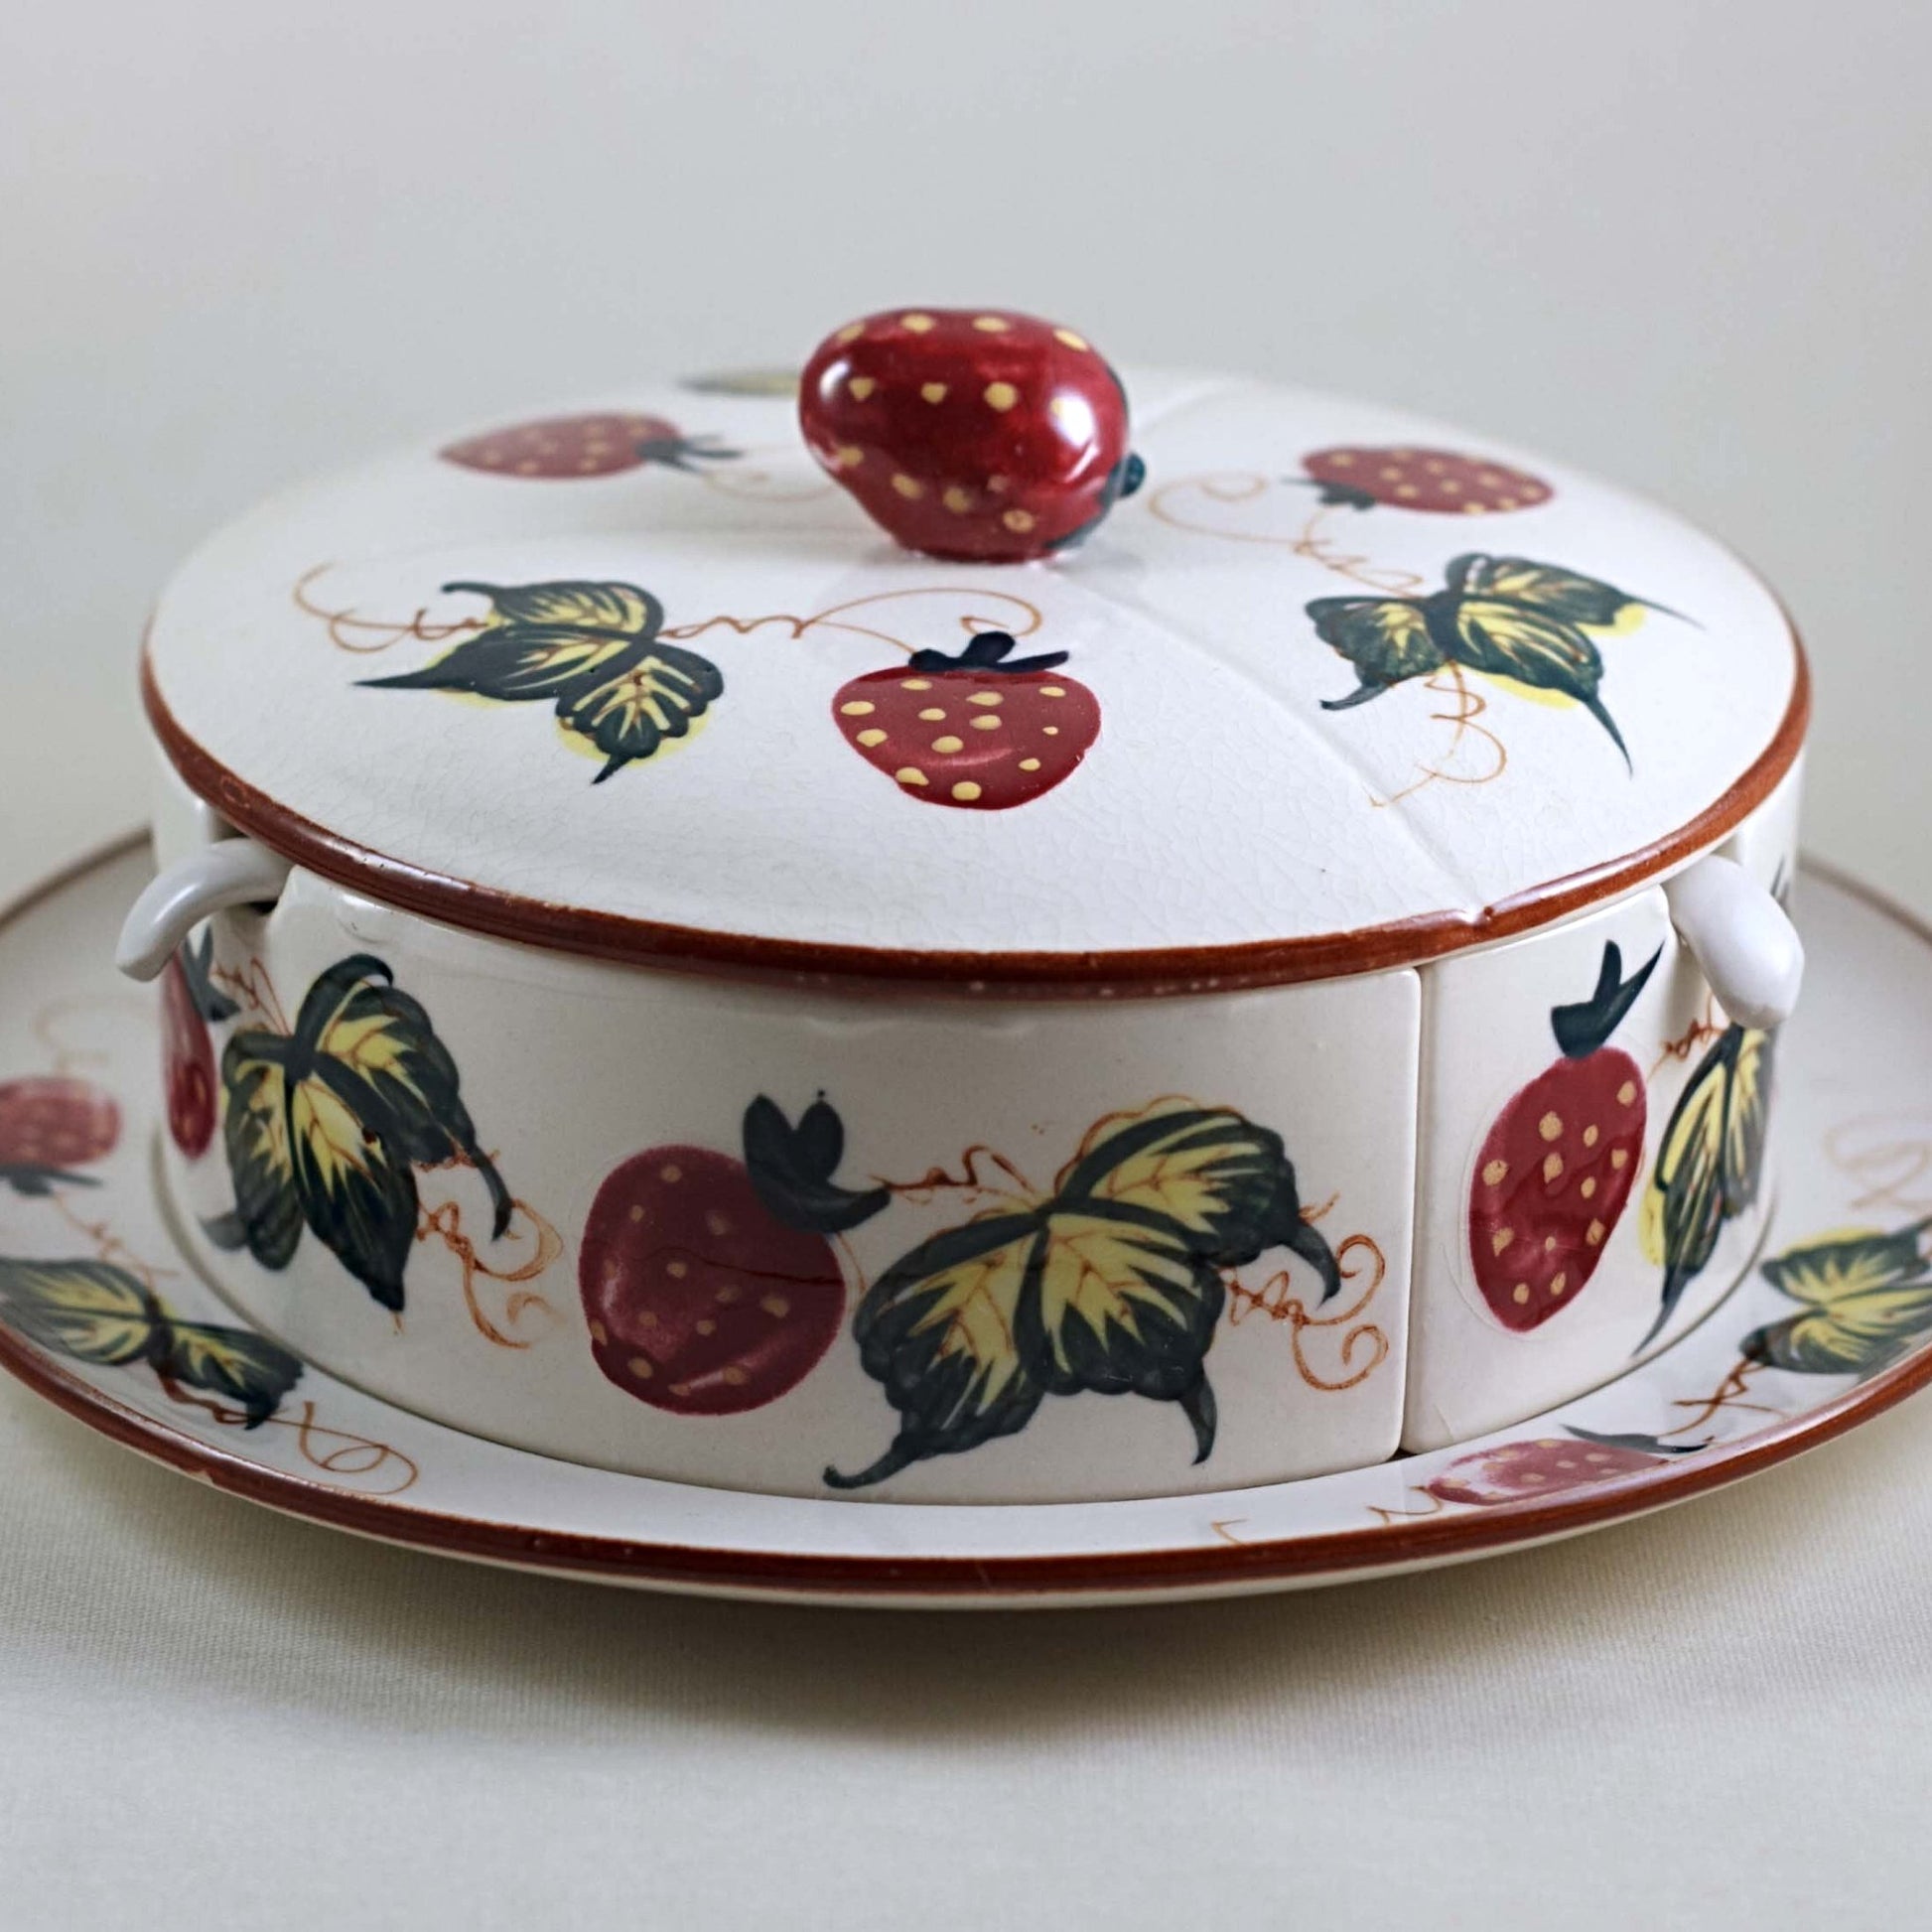 Fred Roberts Company San Francisco MADE IN JAPAN MARMALADE SET Decorated with Strawberries Circa 1950s